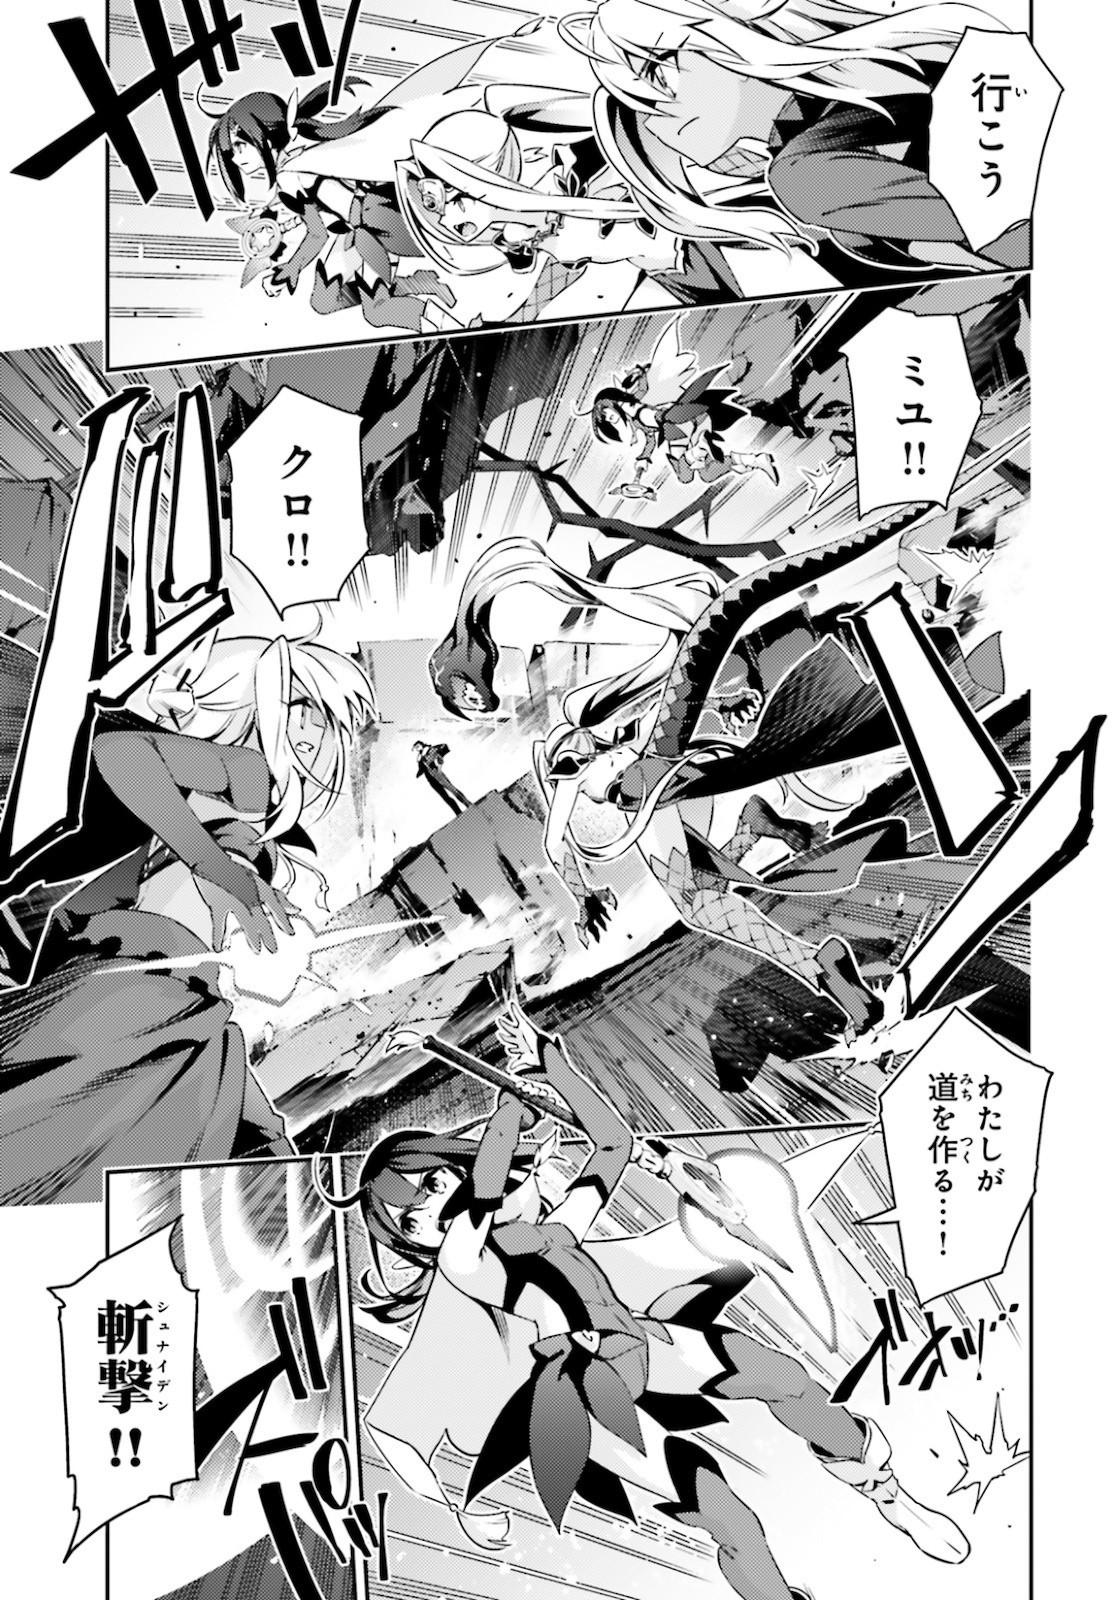 Fate/Kaleid Liner Prisma Illya Drei! - Chapter 59-1 - Page 3